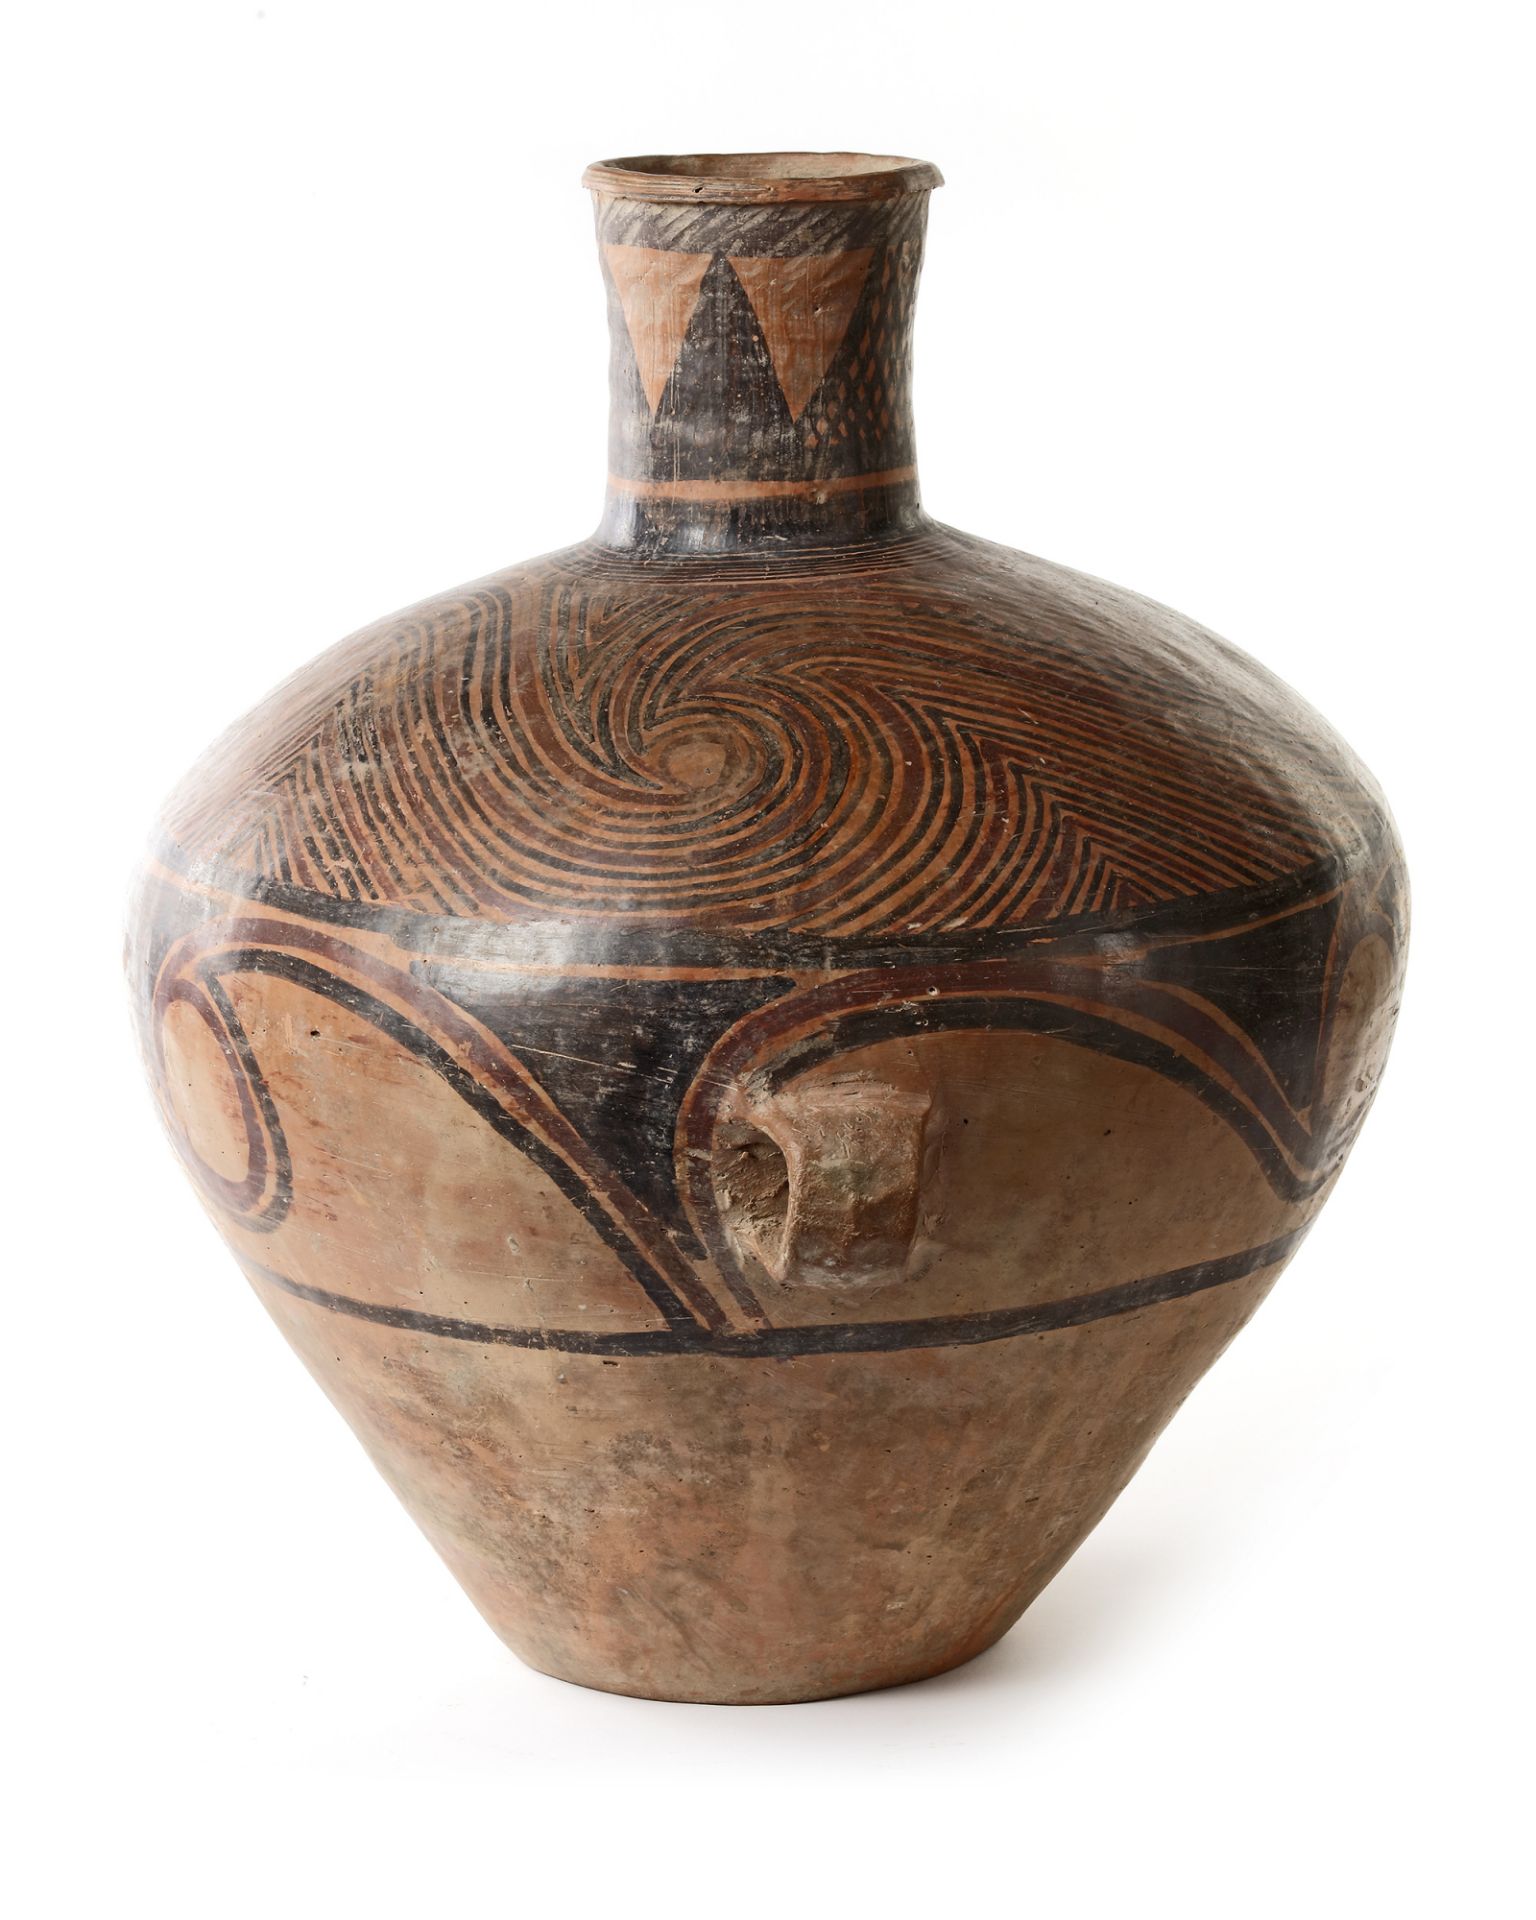 A CHINESE NEOLITHIC PAINTED POTTERY JAR, MAJIAYAO CULTURE, MID TO LATE 3RD MILLENIUM BC - Image 2 of 5